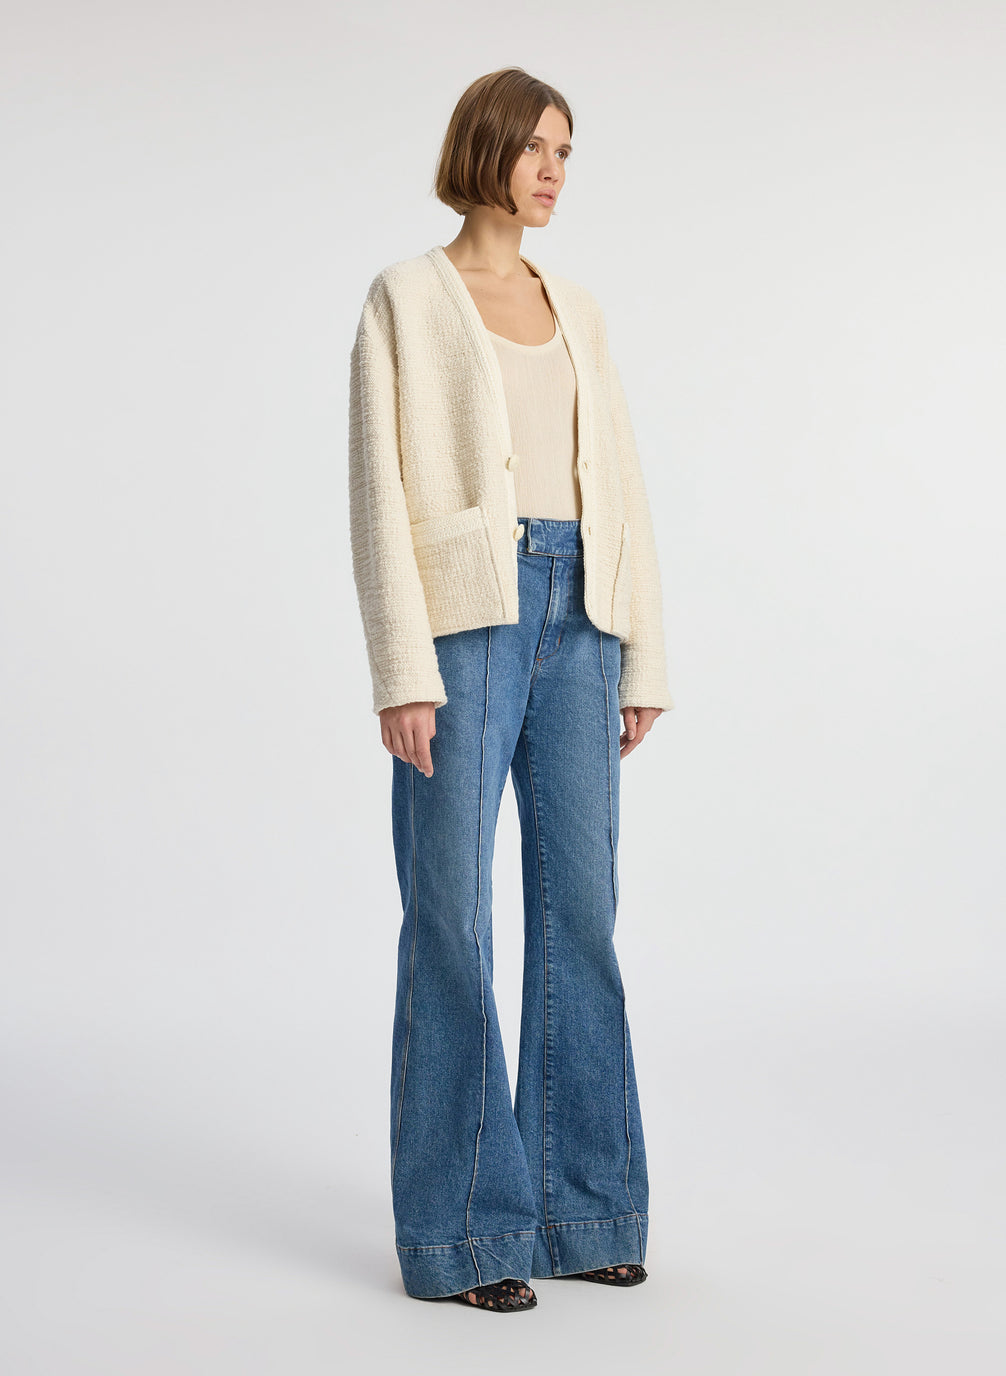 side view of woman wearing cream boucle jacket, cream tank top and medium blue denim jeans